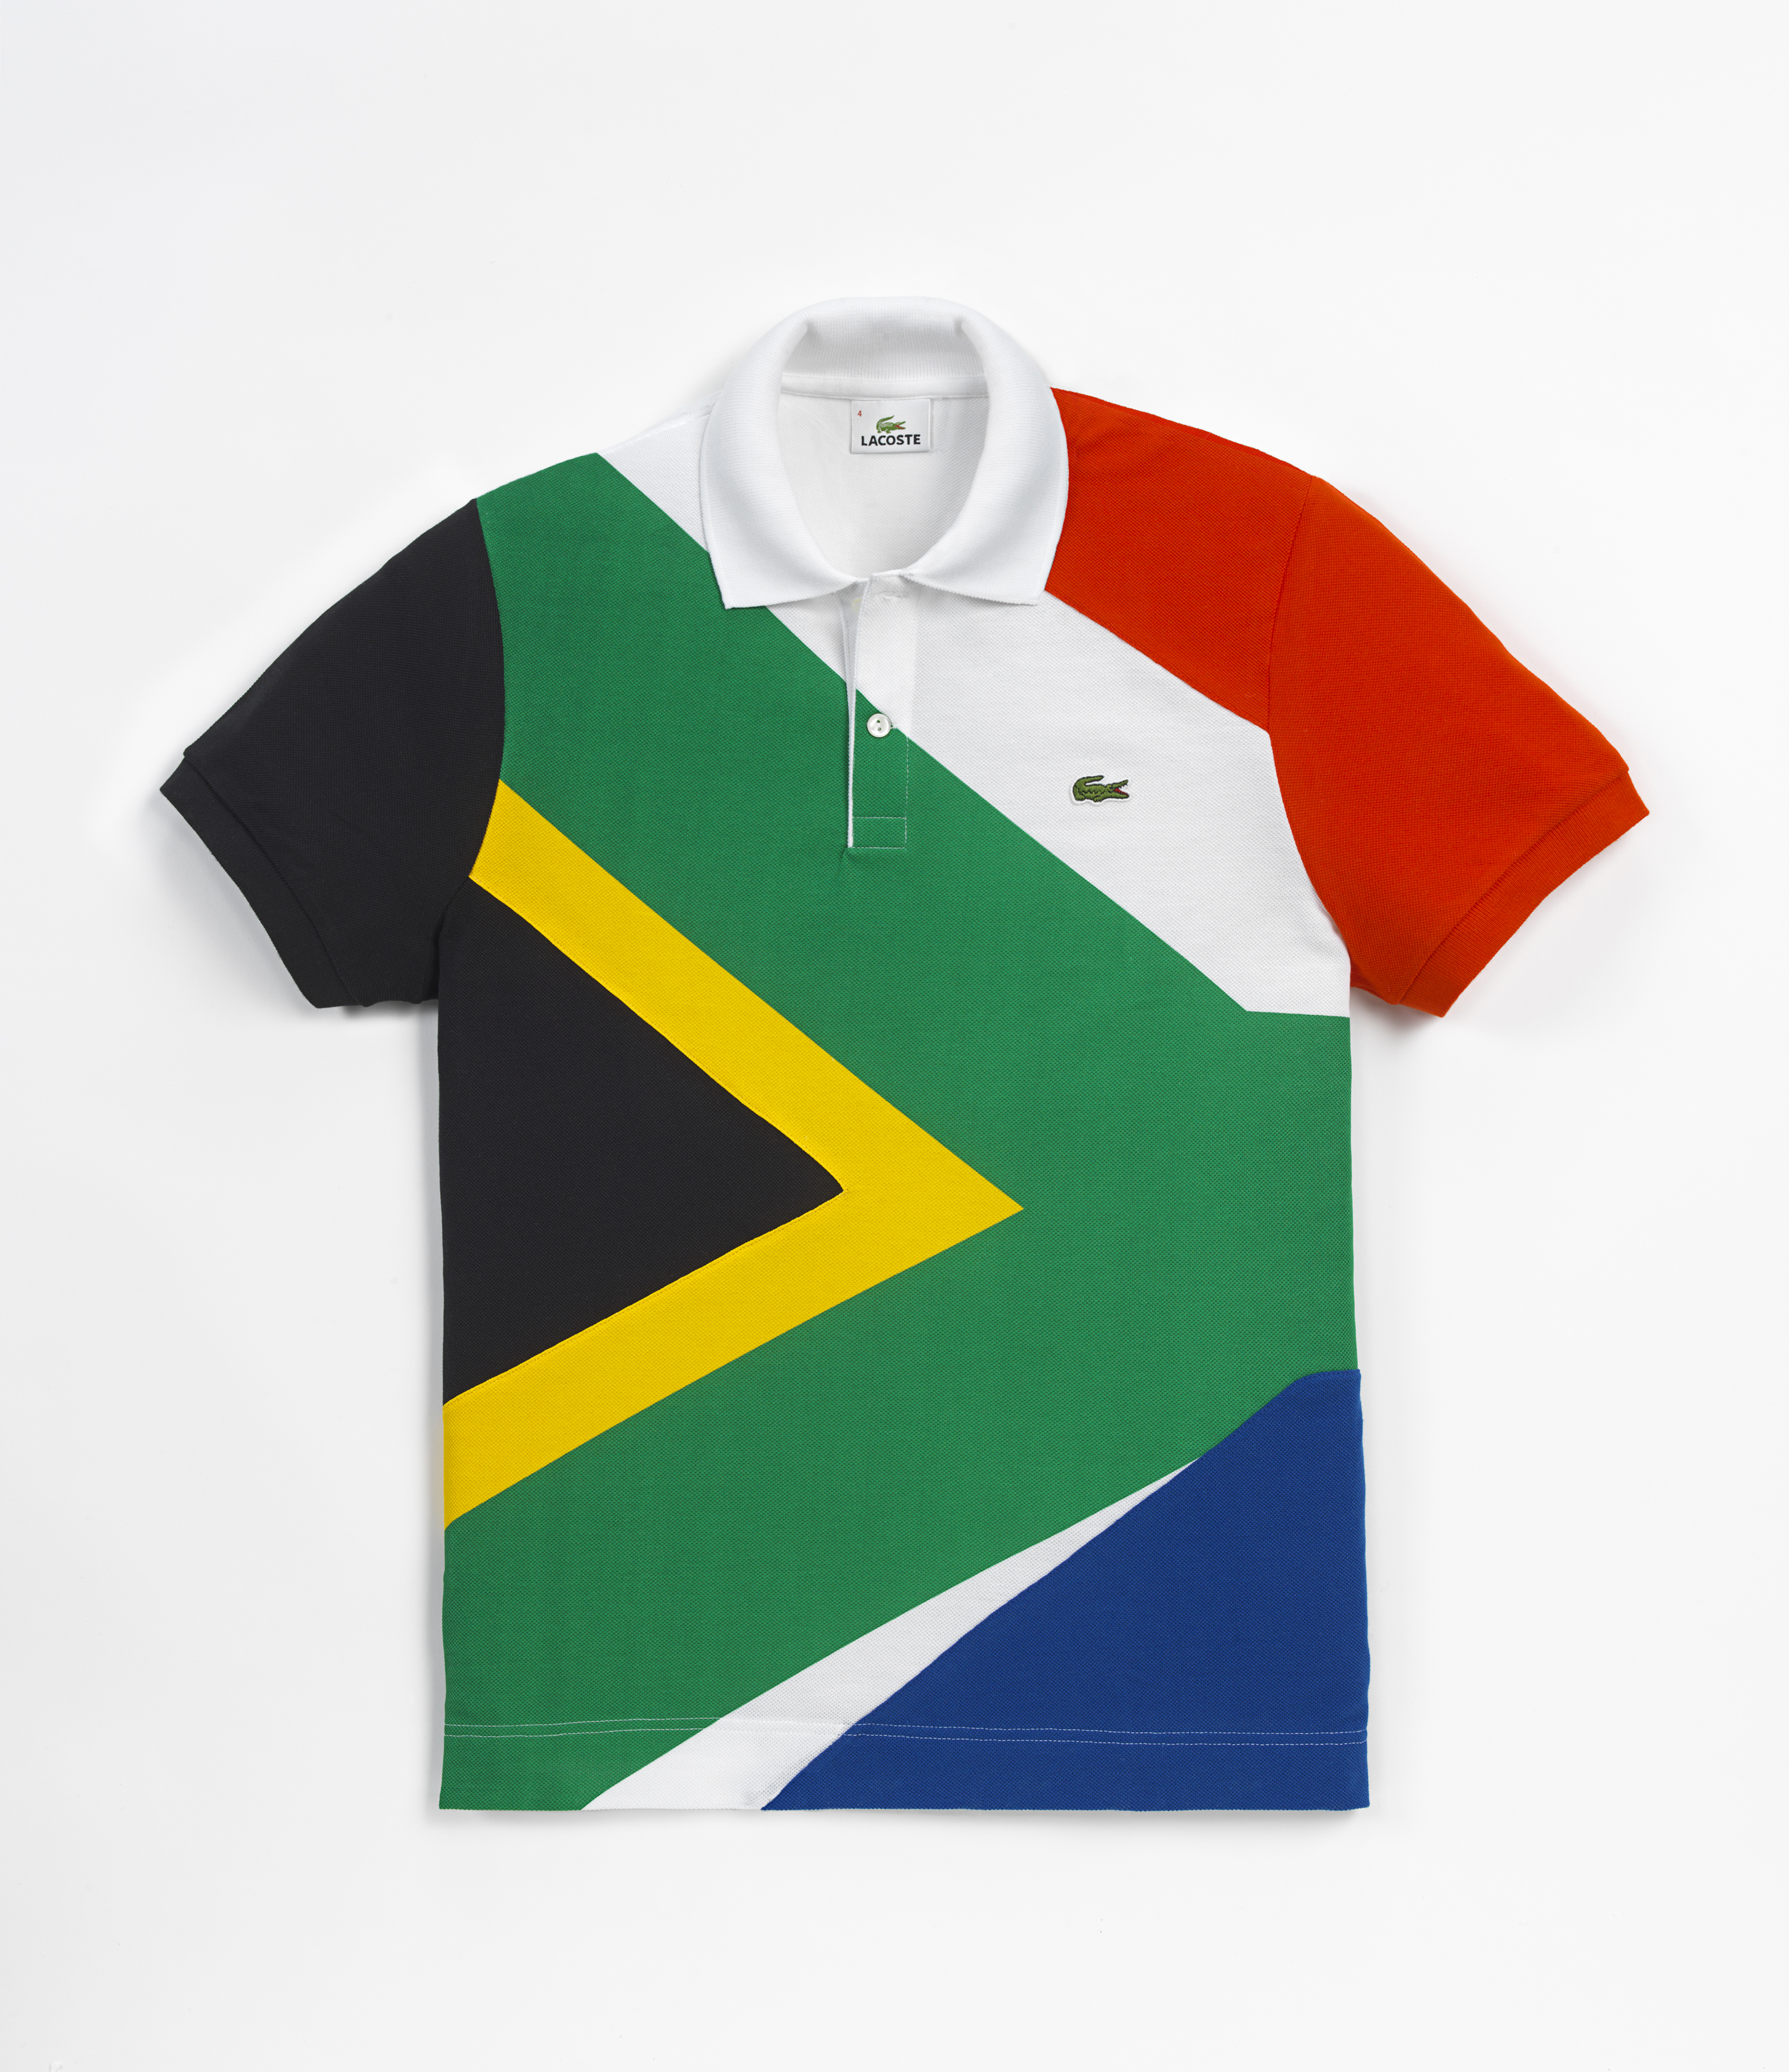 lacoste pride collection